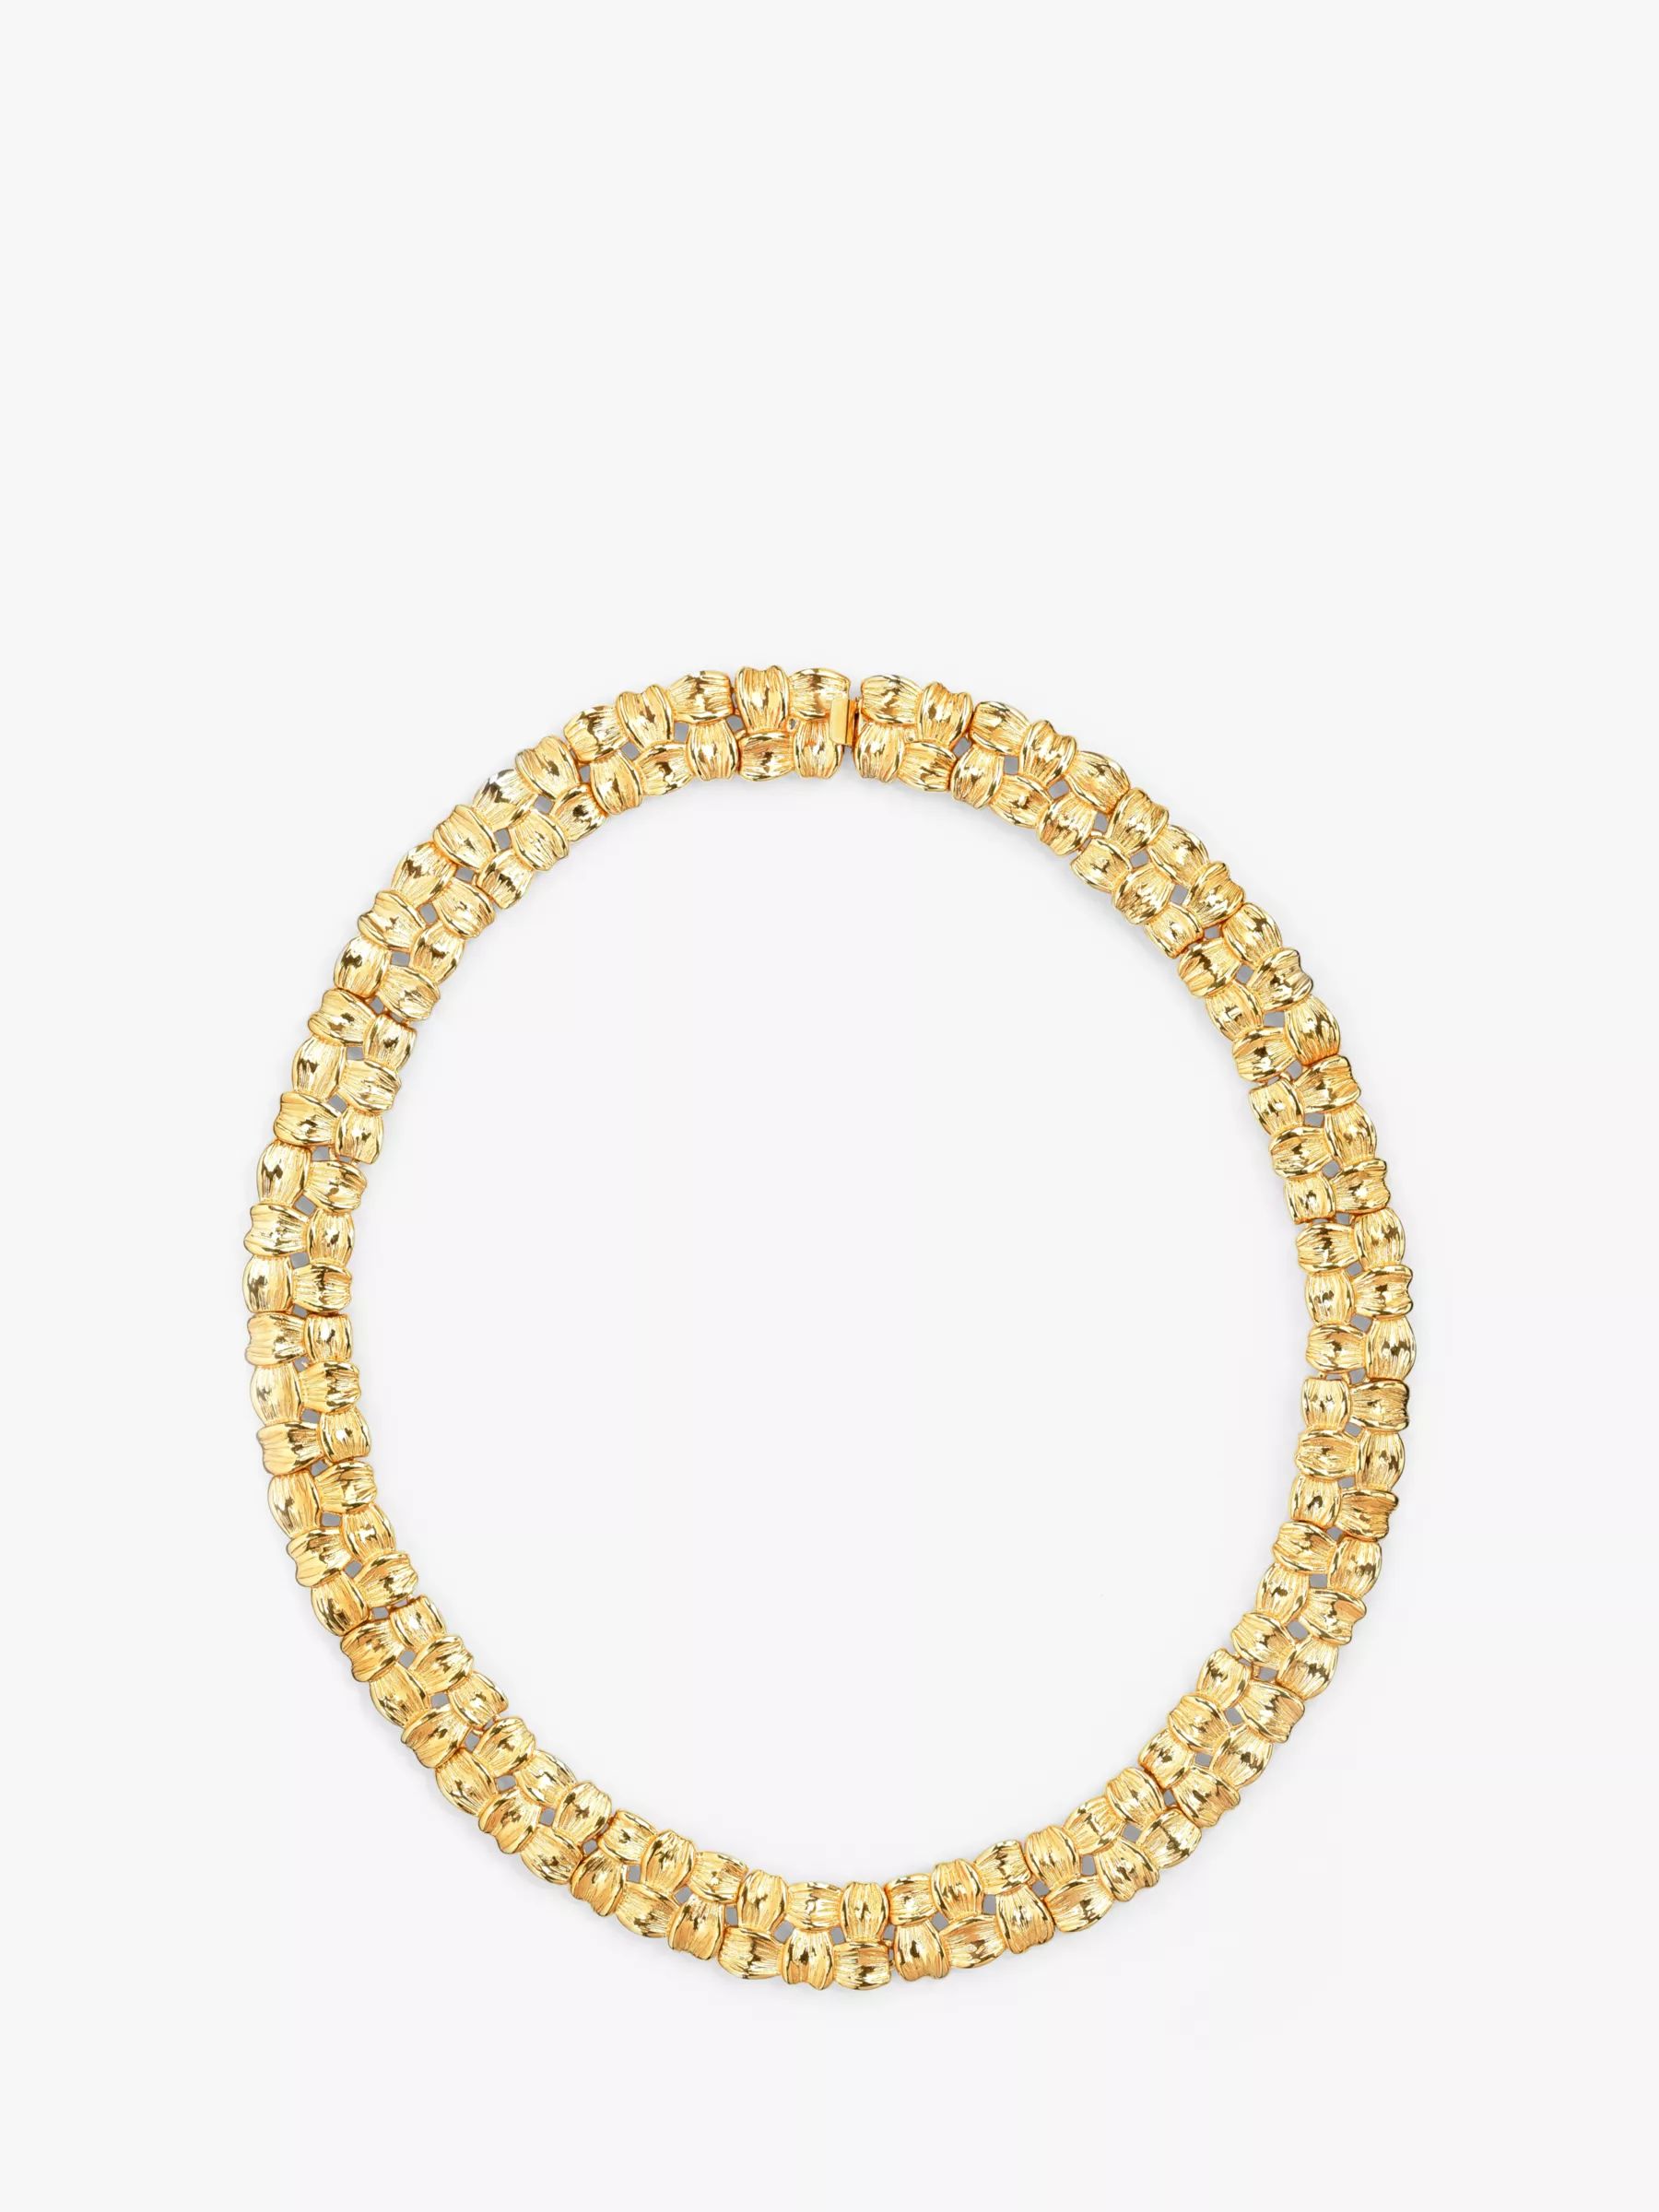 Eclectica Vintage Woven Textured Collar Necklace, Dated Circa 1990s, Gold | John Lewis (UK)